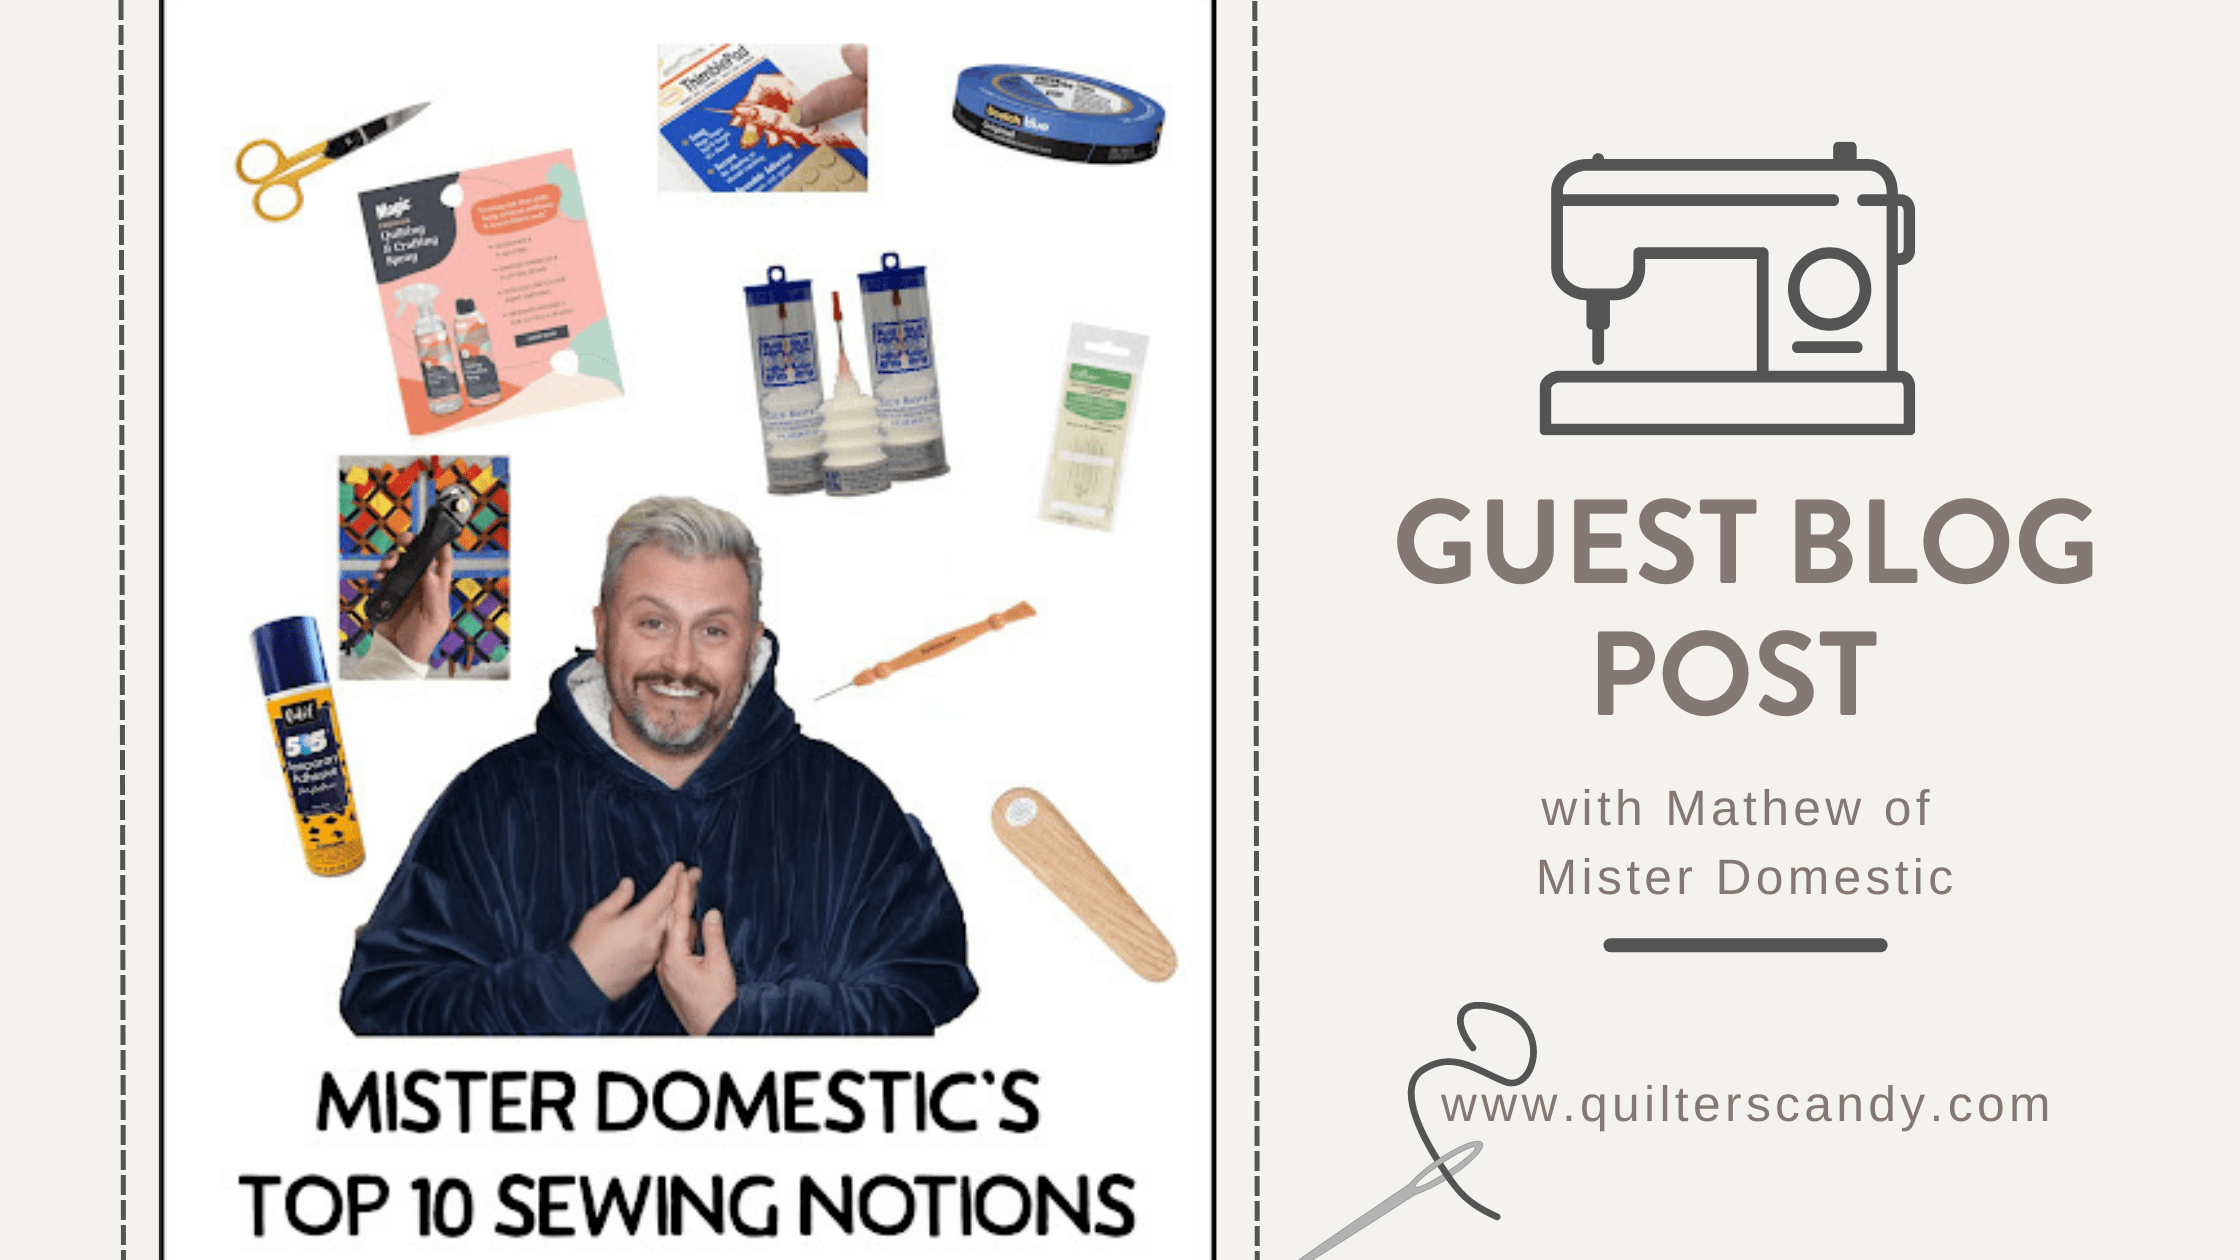 Mister Domestic's Top 10 Sewing Notions